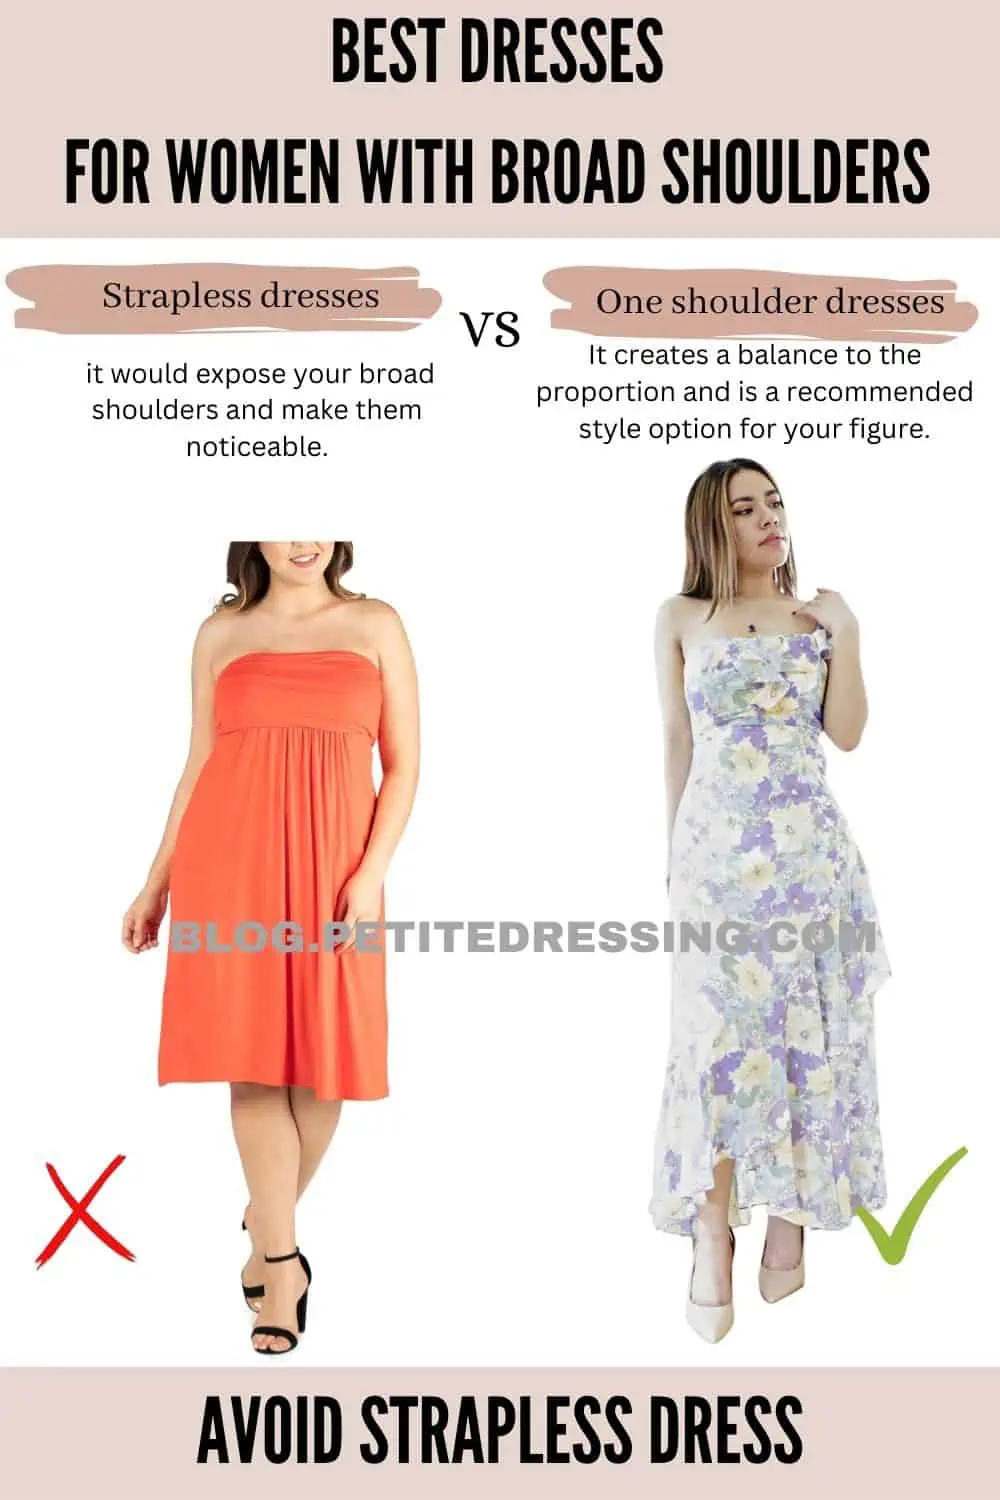 How to Dress Broad Shoulders: 6 Most Flattering Dress Styles + Tips   Dresses for broad shoulders, Broad shoulders, Necklines for dresses